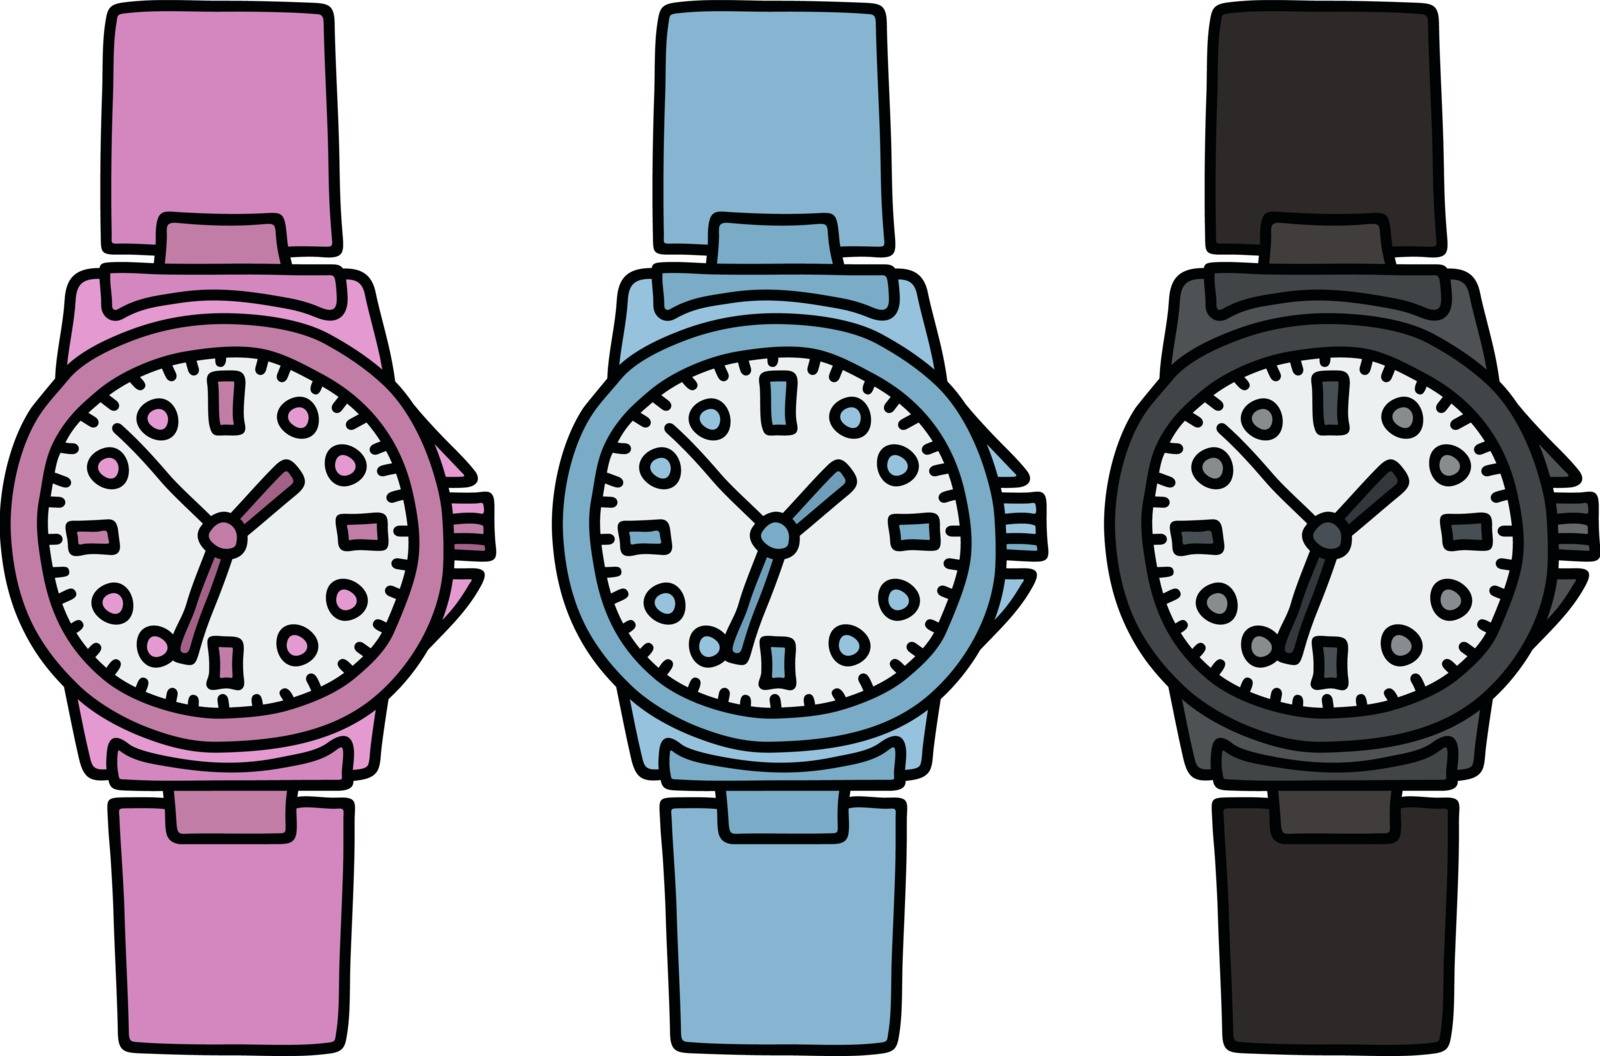 The hand drawing of three color plastic wrist watches